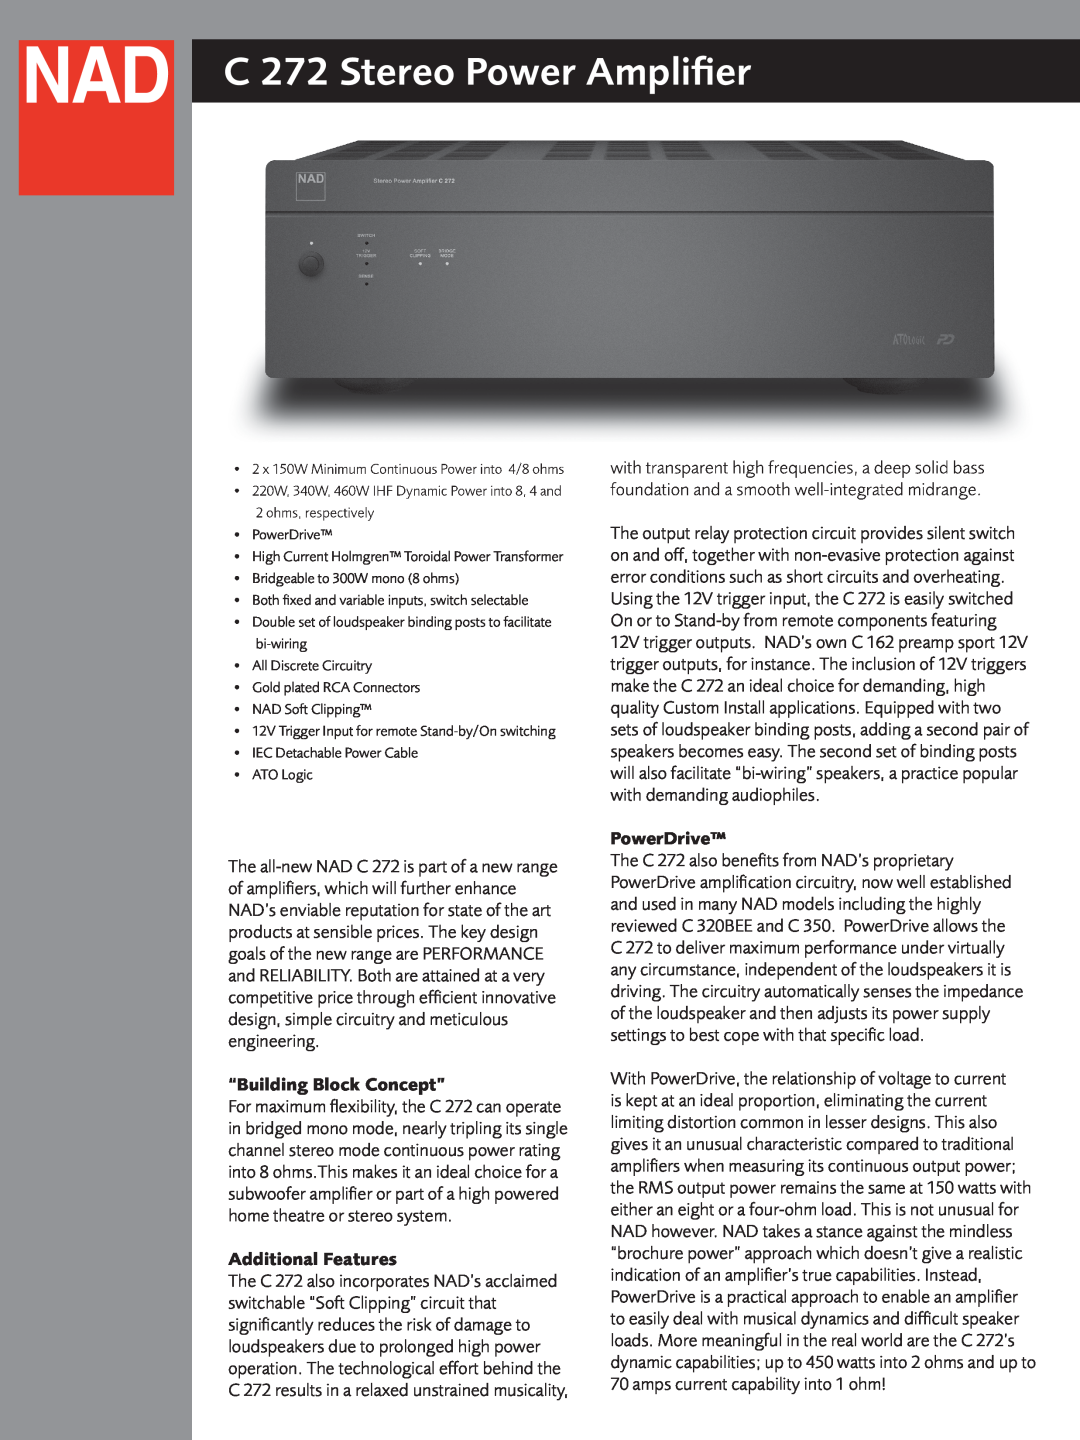 NAD C272 brochure “Building Block Concept”, Additional Features, PowerDrive, C 272 Stereo Power Ampliﬁer 